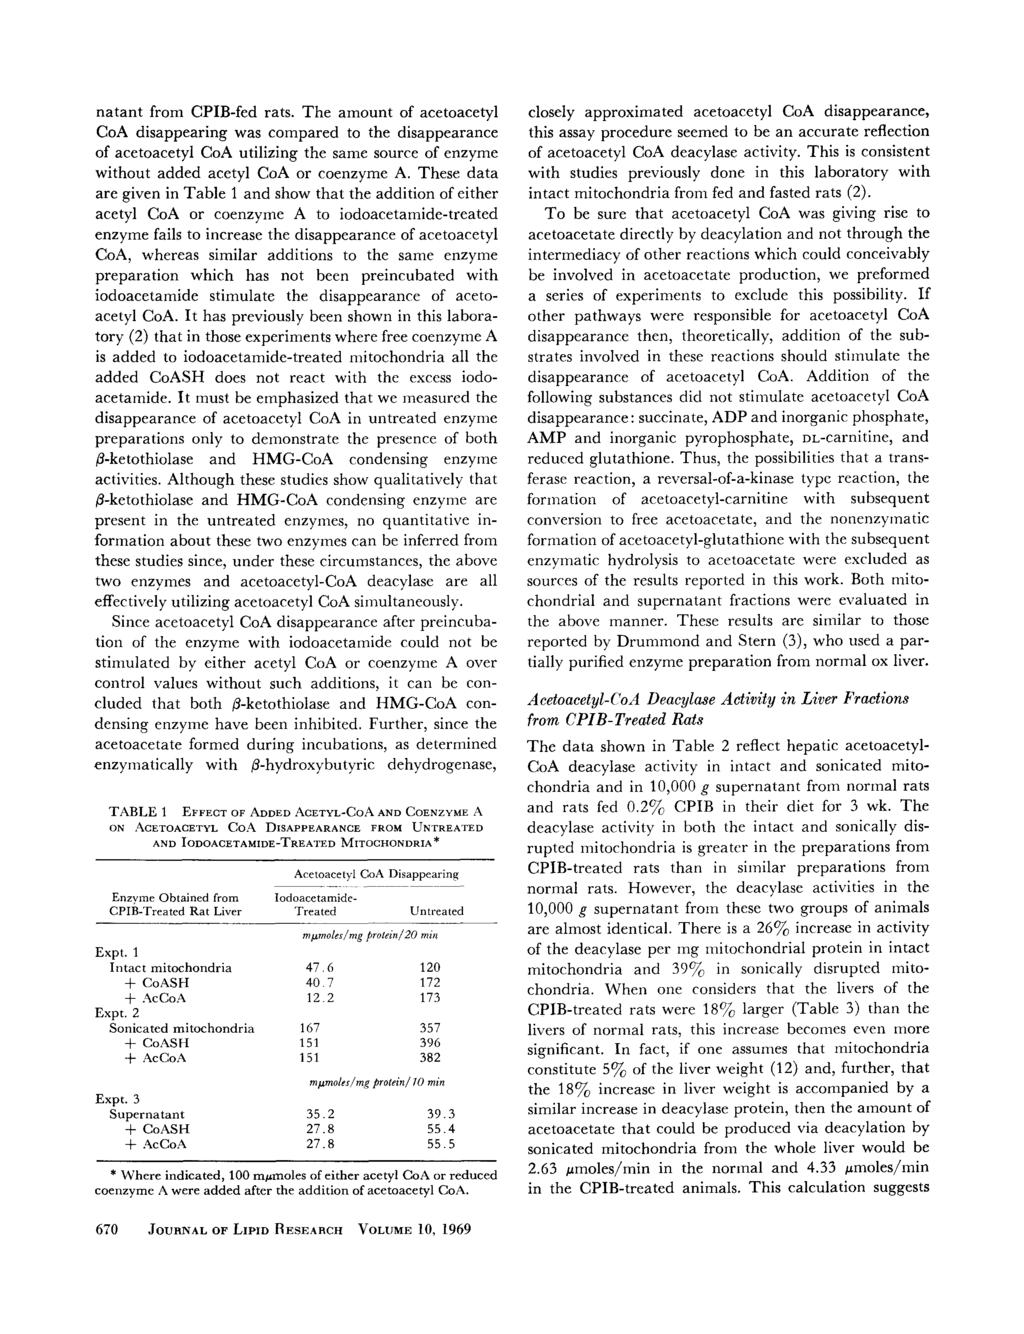 natant from fed rats. The amount of acetoacetyl CoA disappearing was compared to the disappearance of acetoacetyl CoA utilizing the same source of enzyme without added acetyl CoA or coenzyme A.